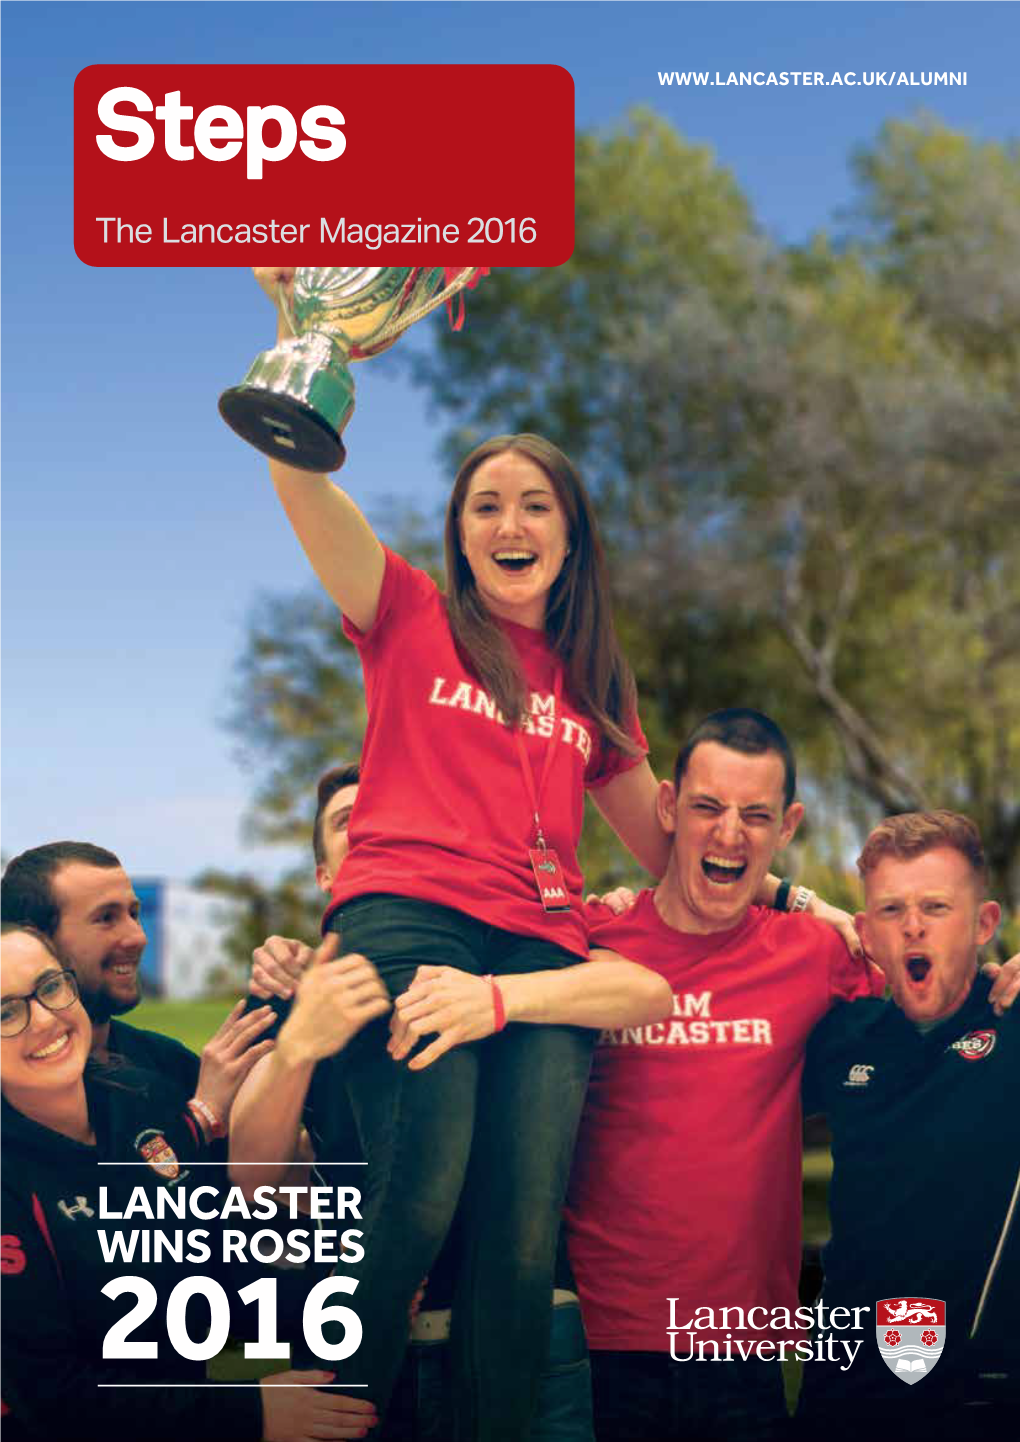 LANCASTER WINS ROSES 2016 Keep in Touch